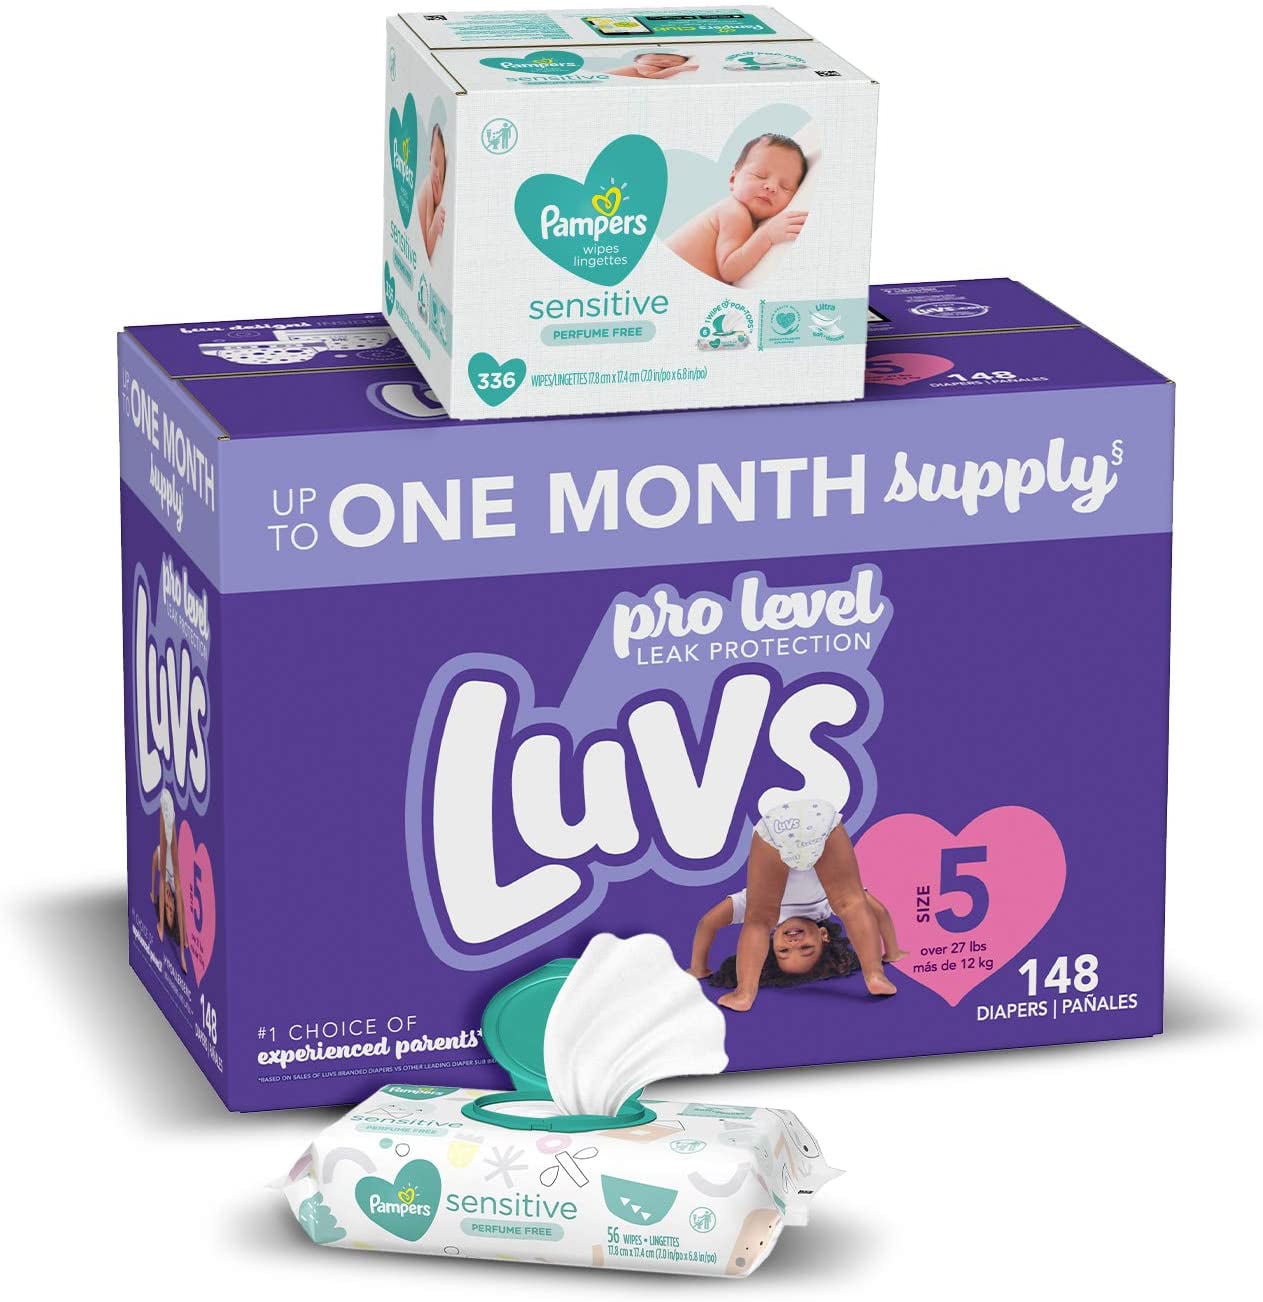 336 Total Wipes Diapers Size 5 6X Pop-Top Pack Luvs Ultra Leakguards Disposable Baby Diapers ONE Month Supply with Pampers Sensitive Water Based Baby Diaper Wipes 148 Count and Baby Wipes 